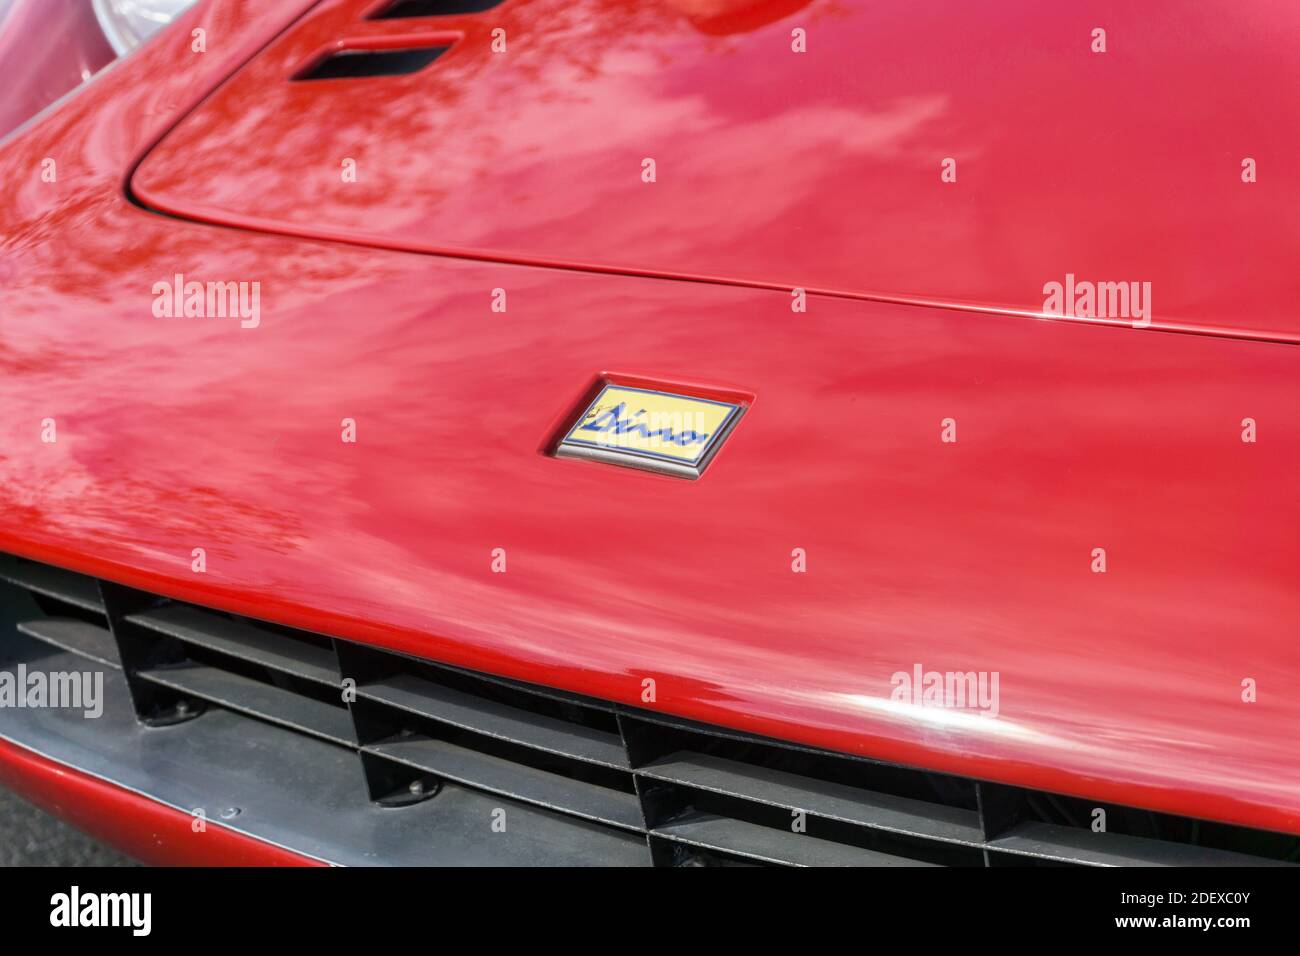 Close up of the logo emblem badge and bonnet of a red 1970s Ferrari Dino 246 GT small sports car Stock Photo